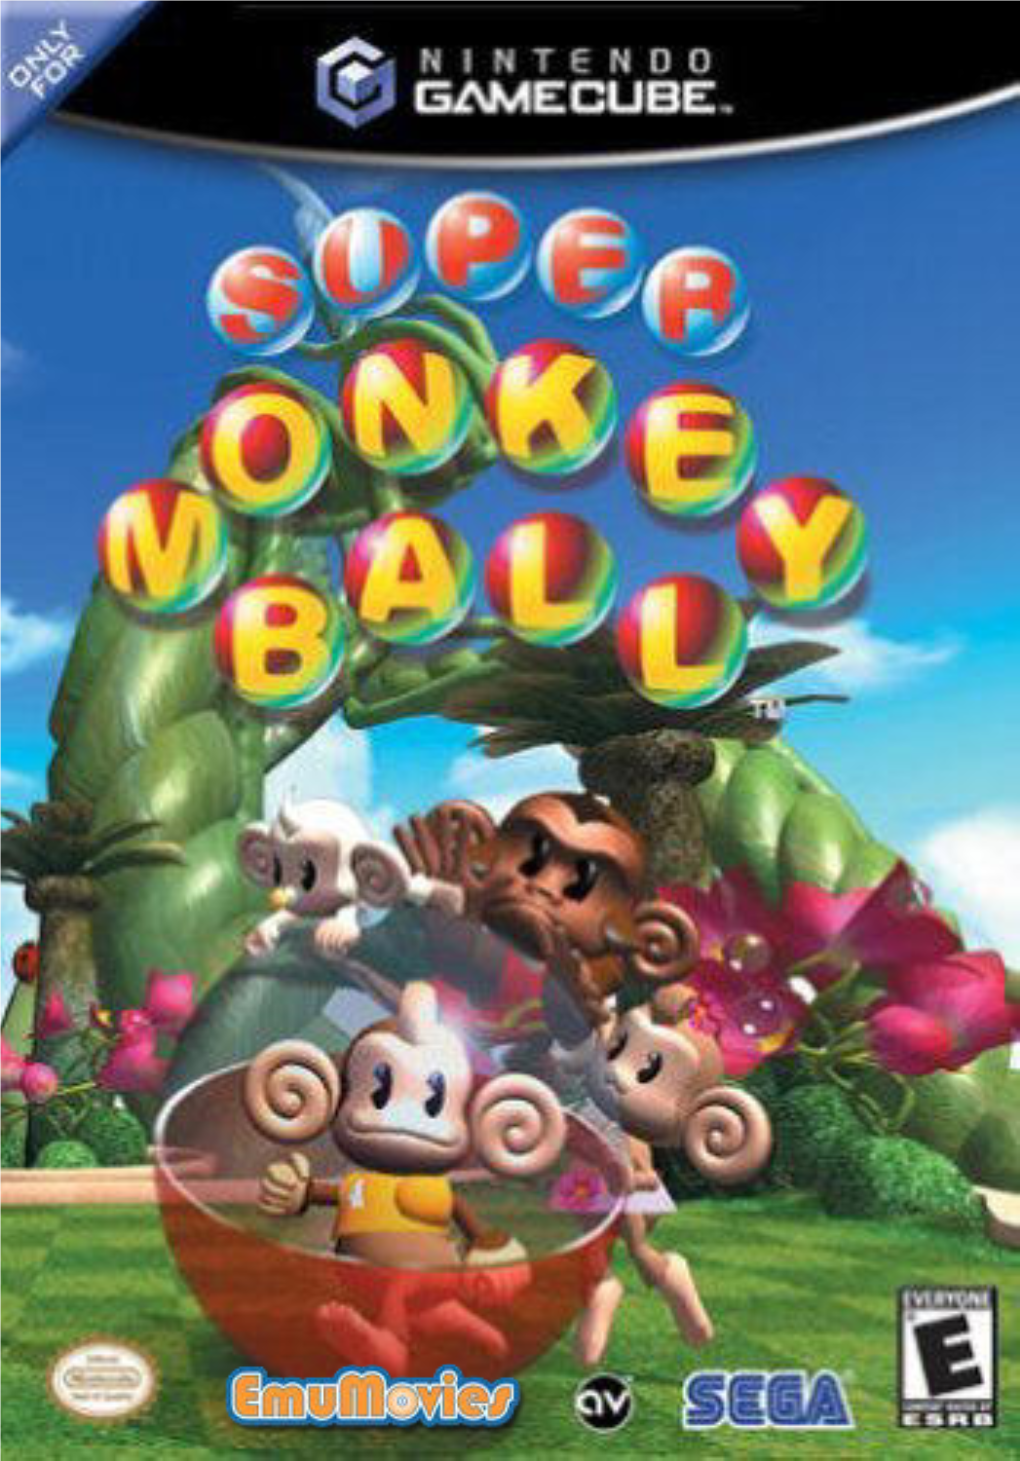 Super Monkey Ball Is a Registered Player Becomes So Great That the Losing Trademark Or a Trademark of Sega Corporation and Its Affiliates